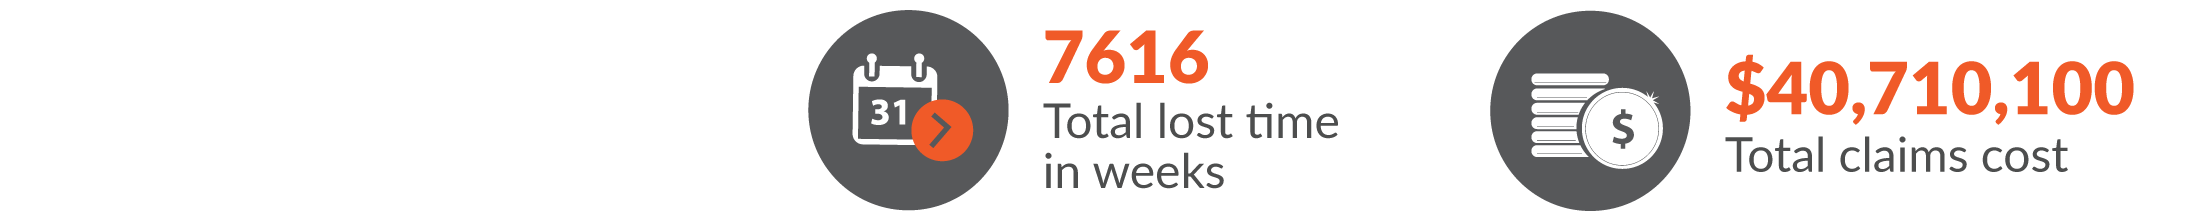 This infographic shows the total workers compensation claims resulted in 7616 total lost time in weeks and $40,710,100 was paid in benefits.